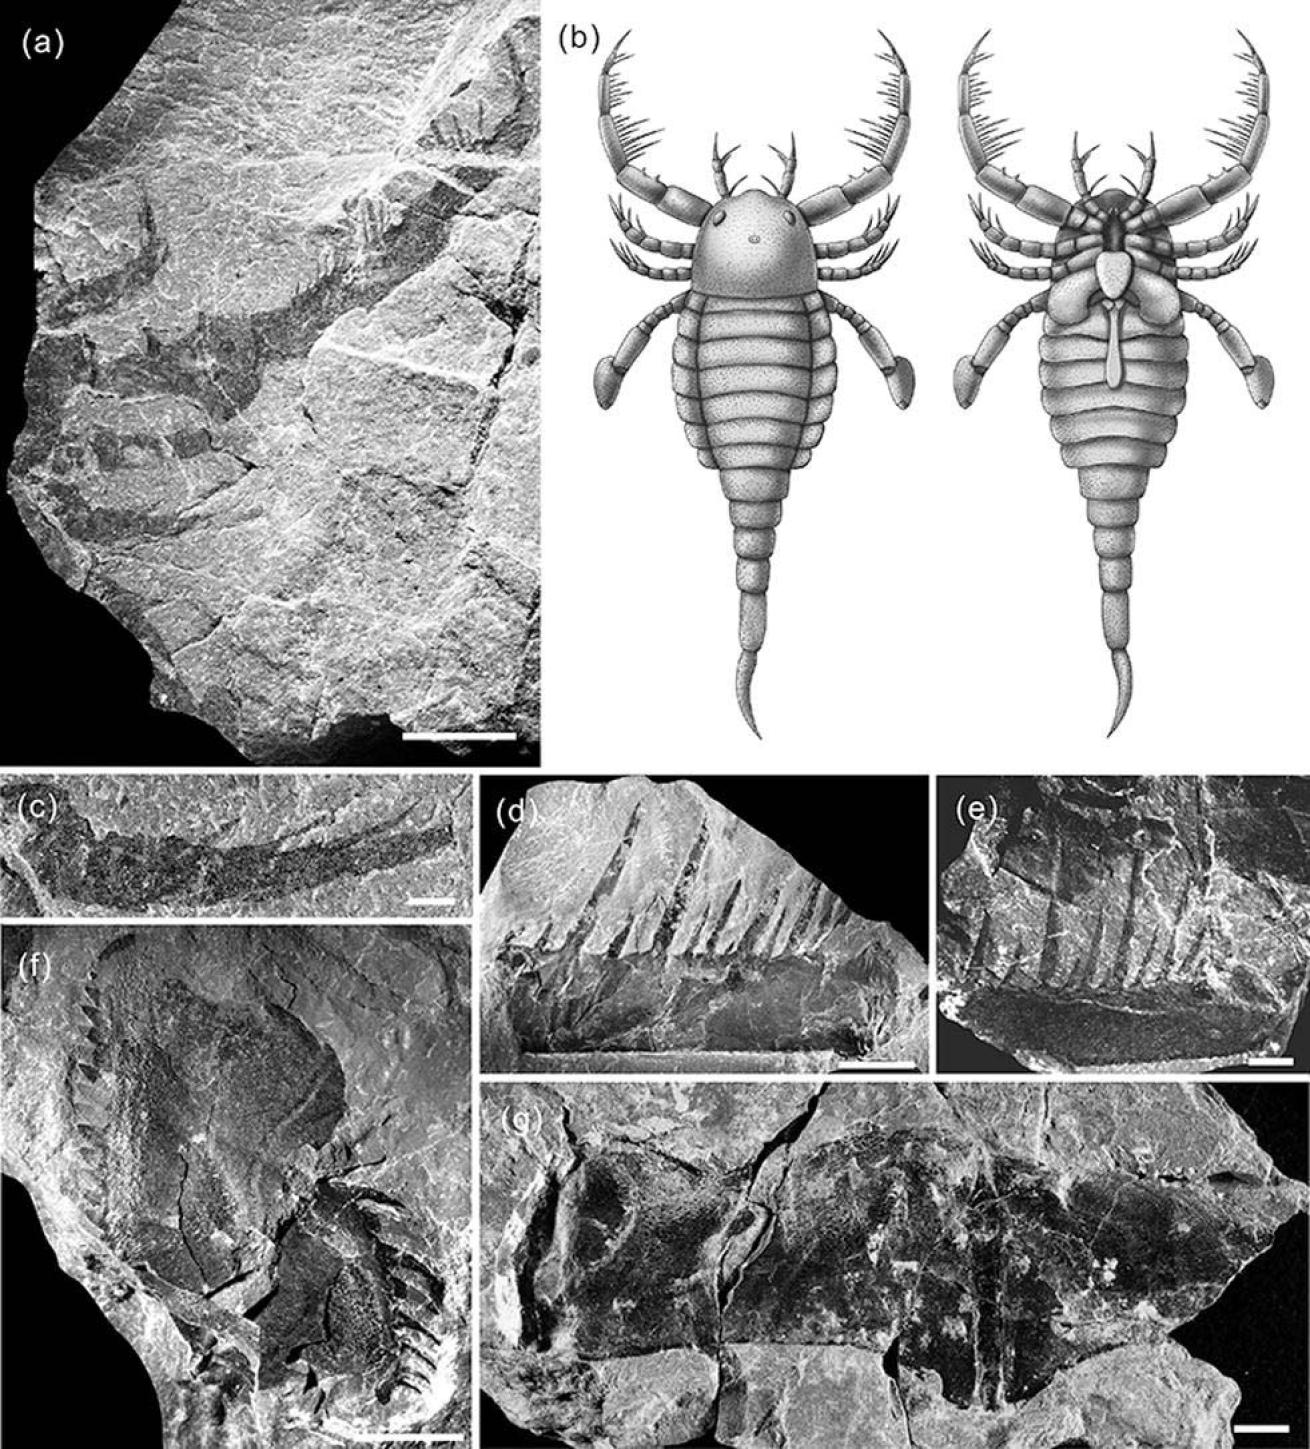 Sea scorpion fossil and sketch